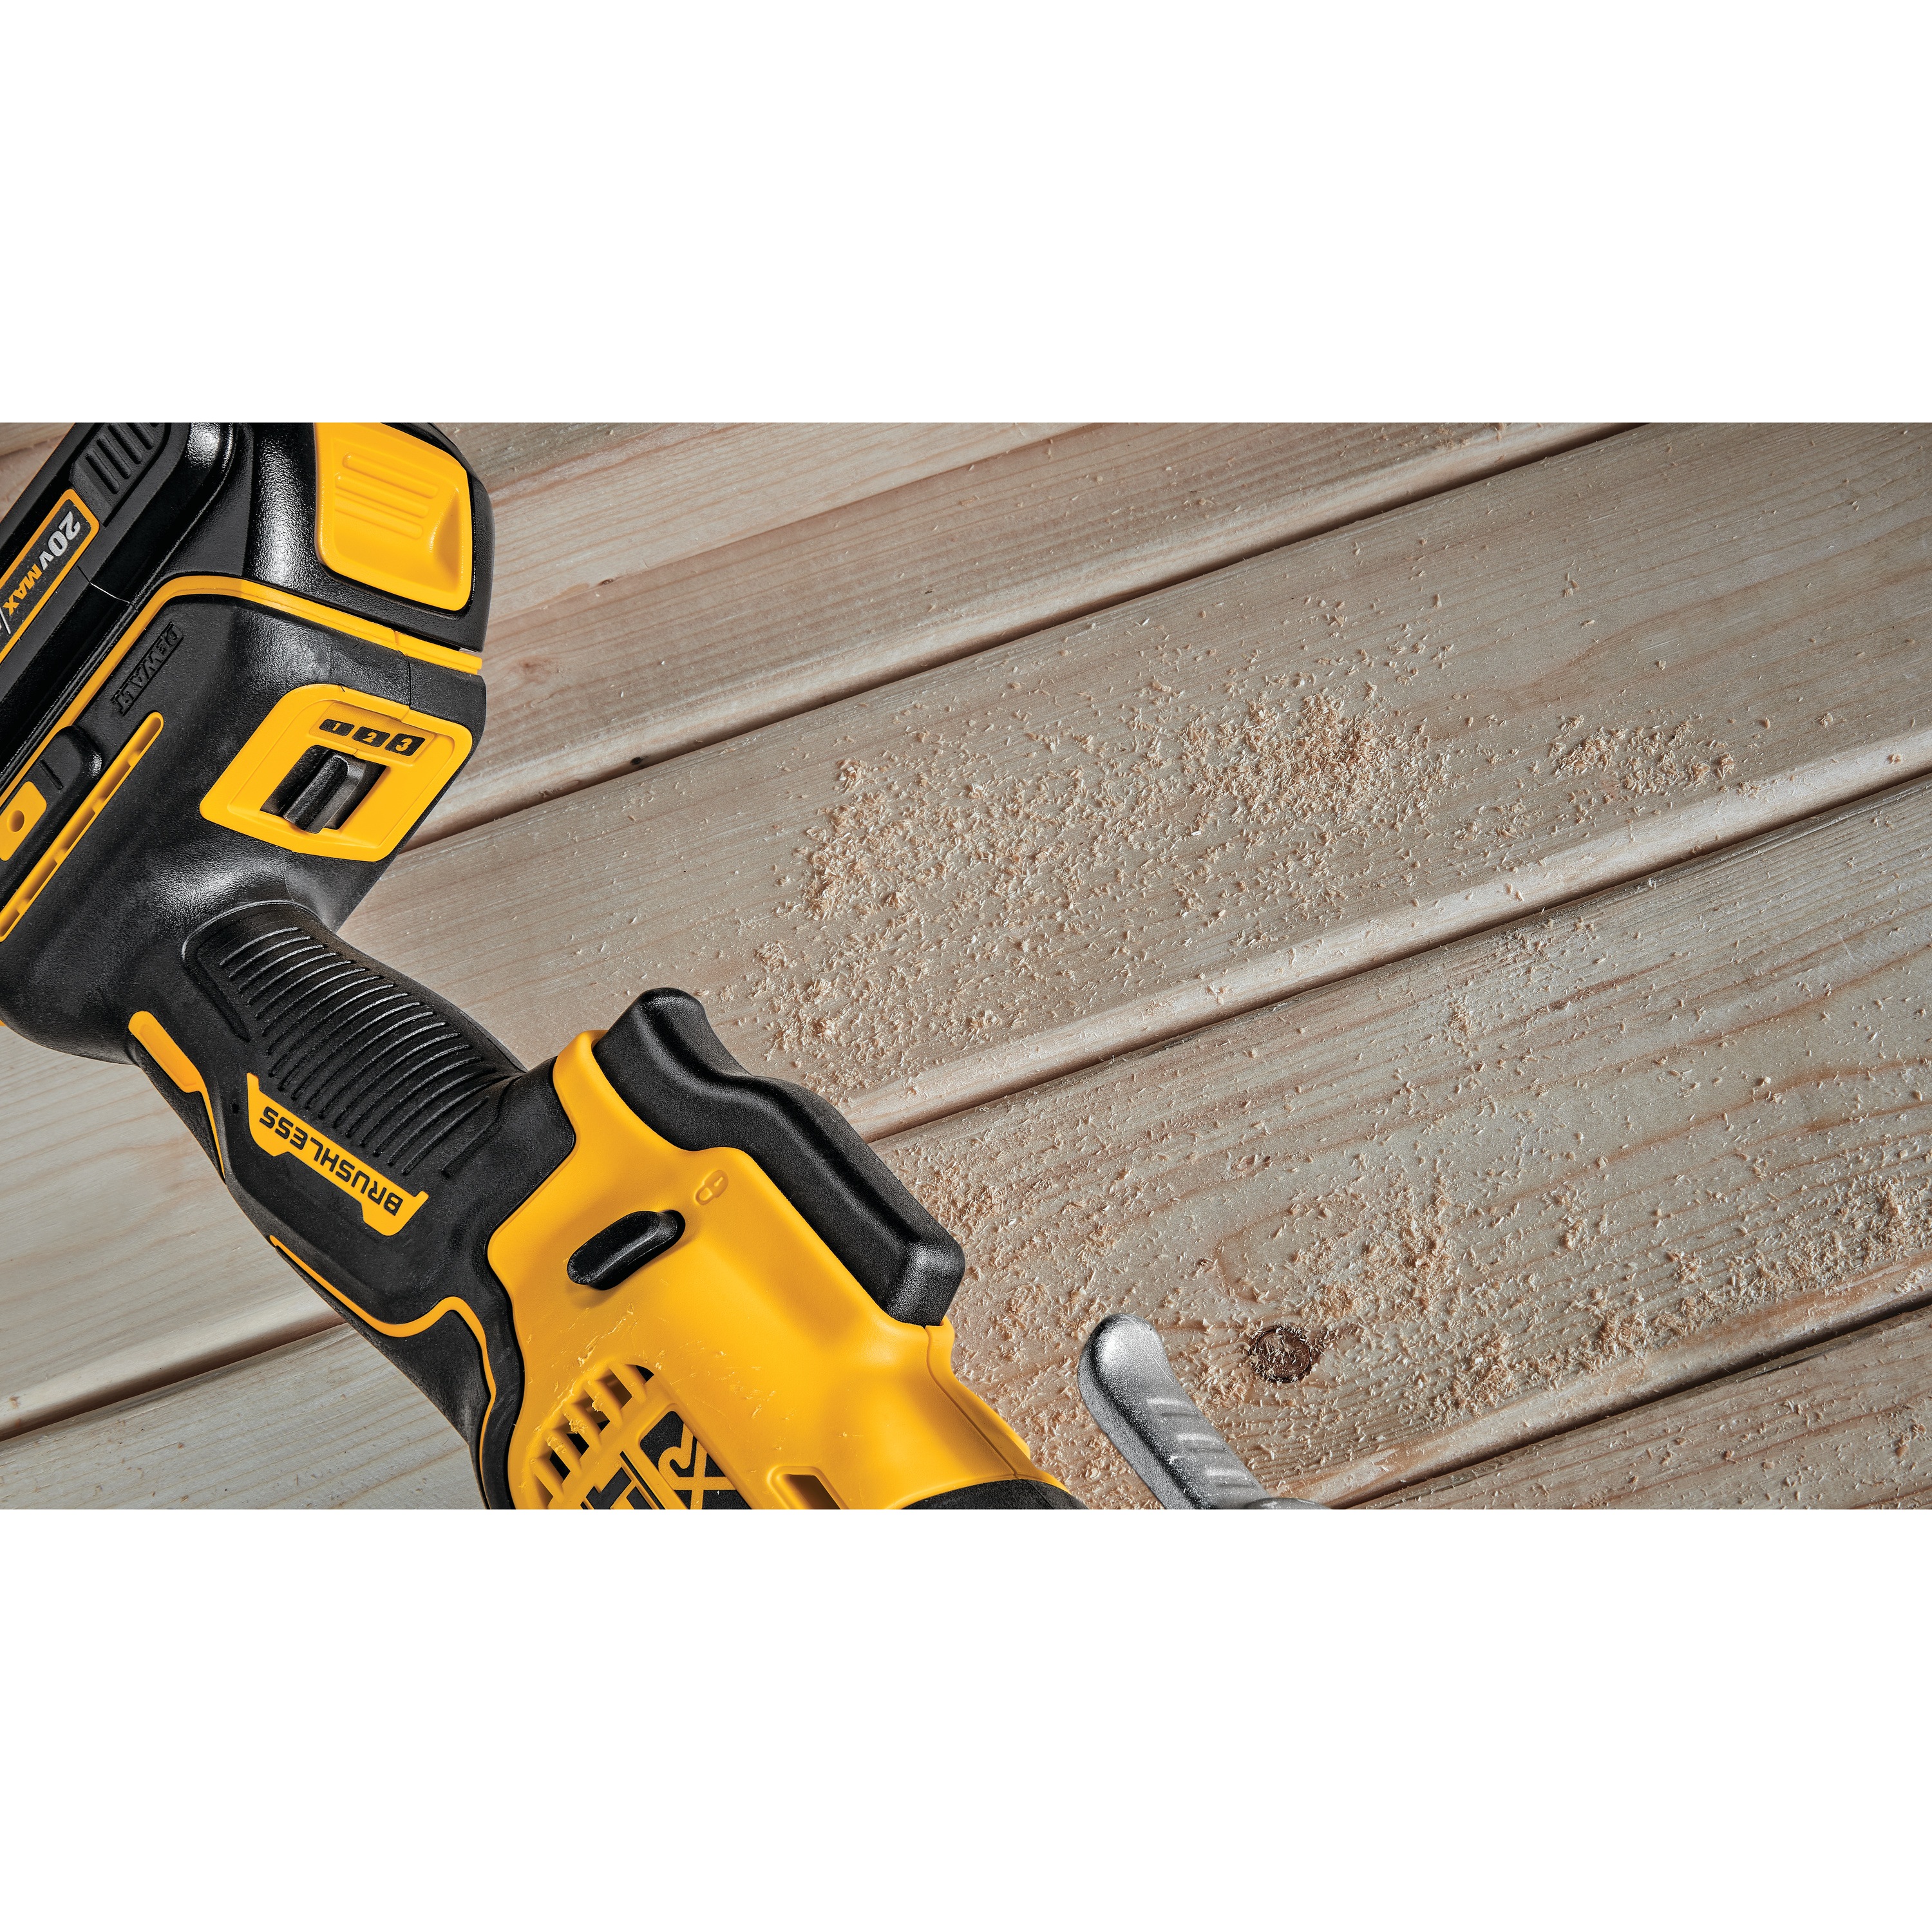 Dual Grip variable speed trigger feature of XR Cordless Oscillating Multi Tool